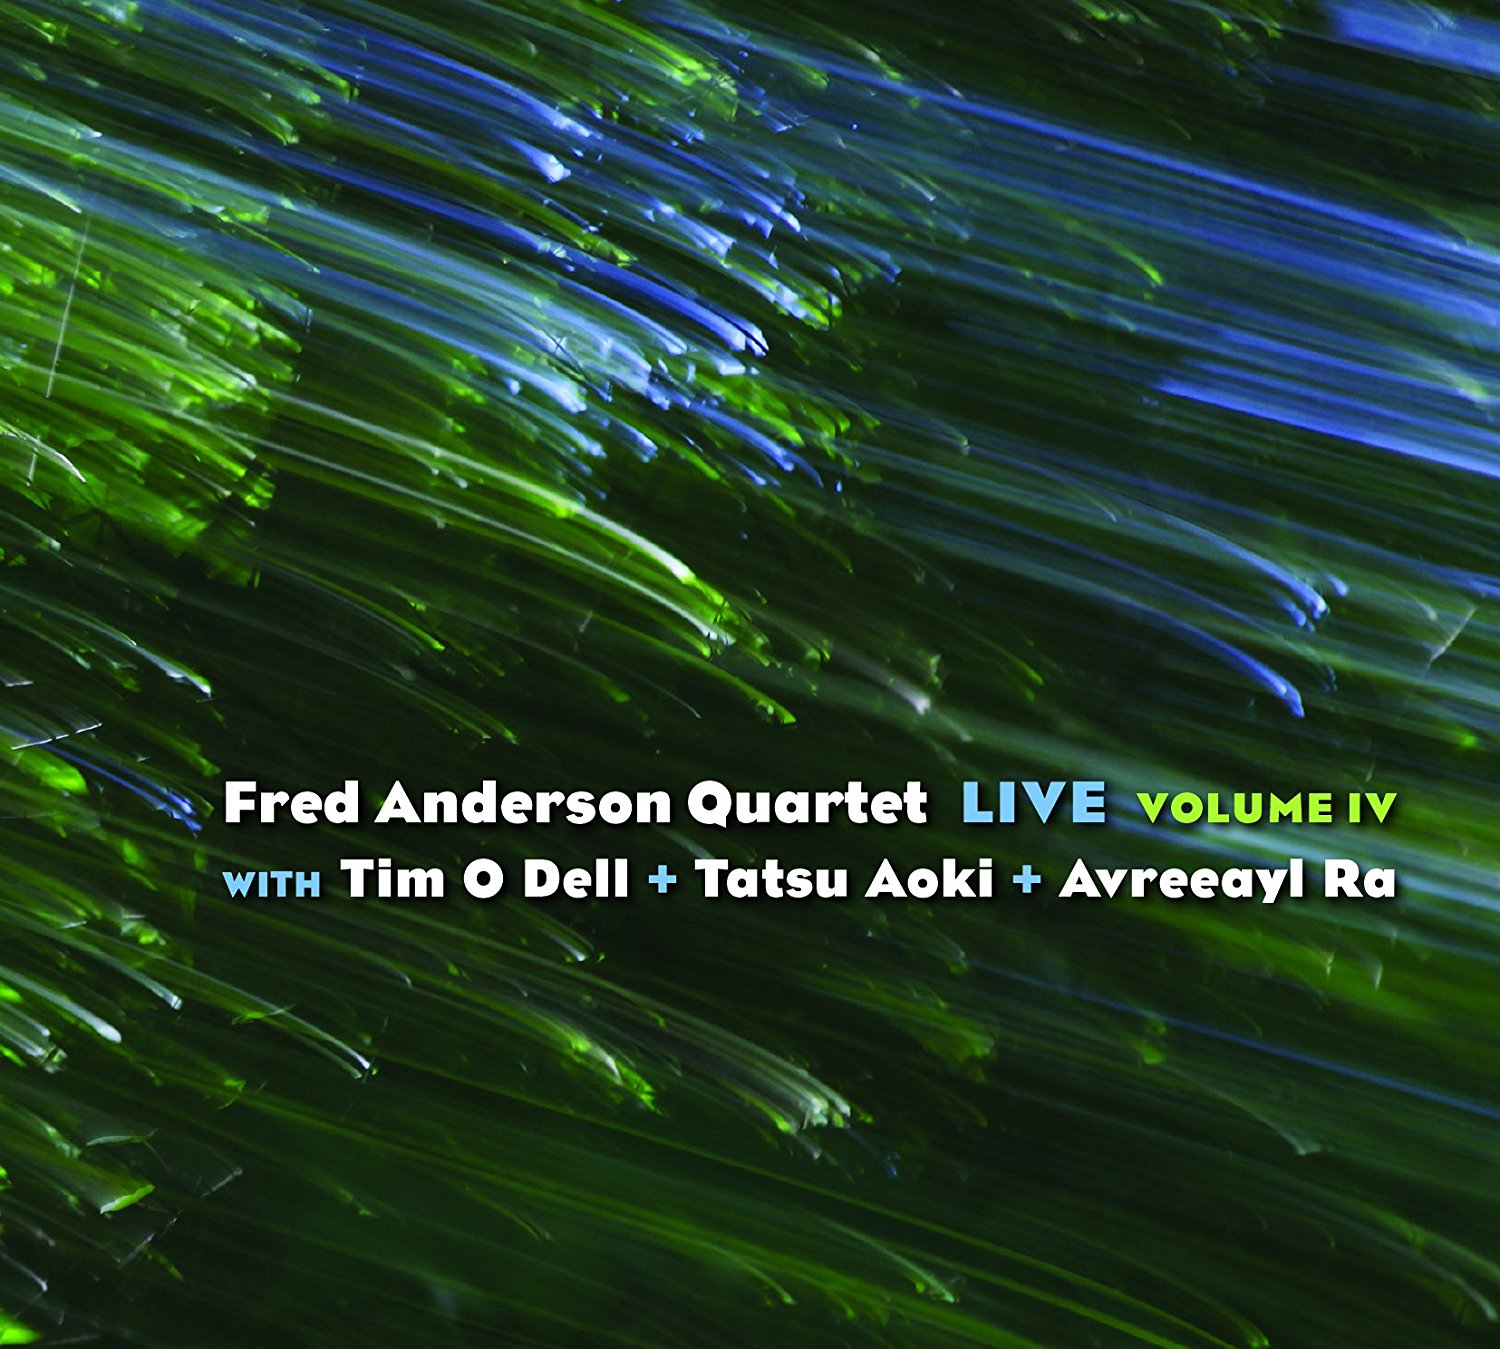 FRED ANDERSON - Fred Anderson Quartet Live Volume IV cover 